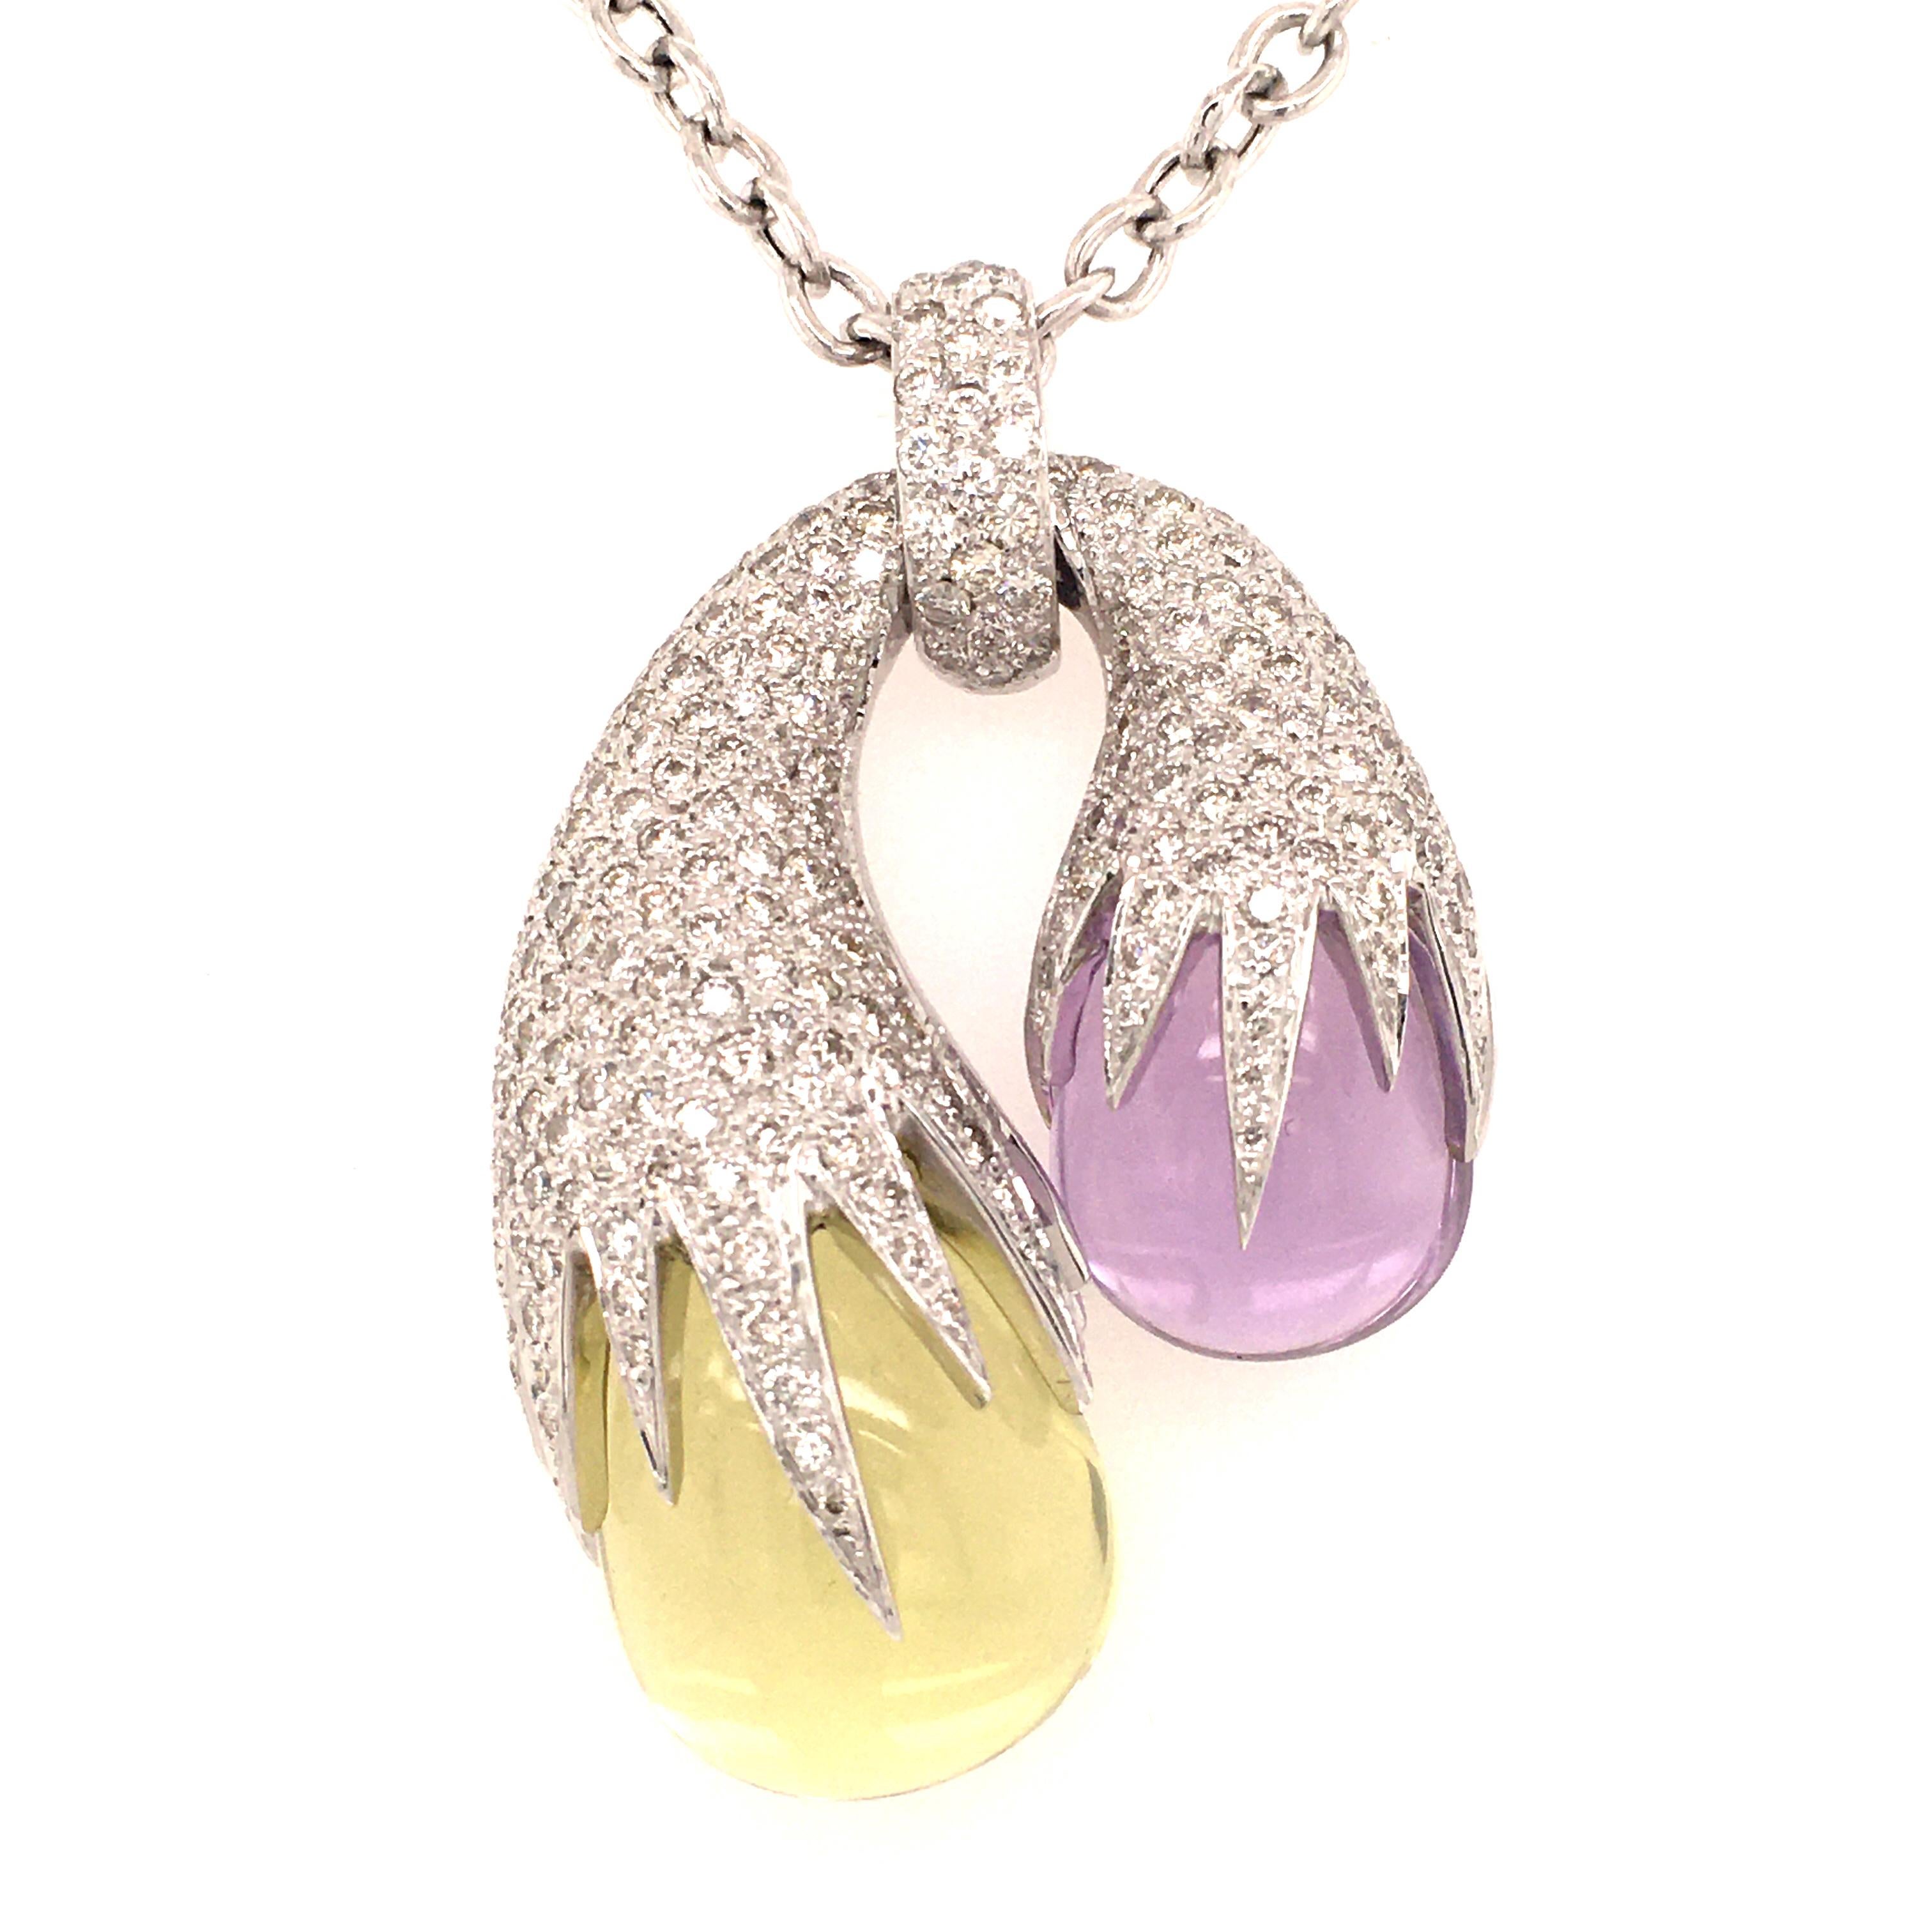 Unique modern pendant necklace in white gold 750, set with 1 polished amethyst and 1 polished lemon quartz, covered with brilliant cut diamonds totaling approx. 4 ct of G/H-vs quality. Nice anchor chain in white gold with lobster clasp. We carry